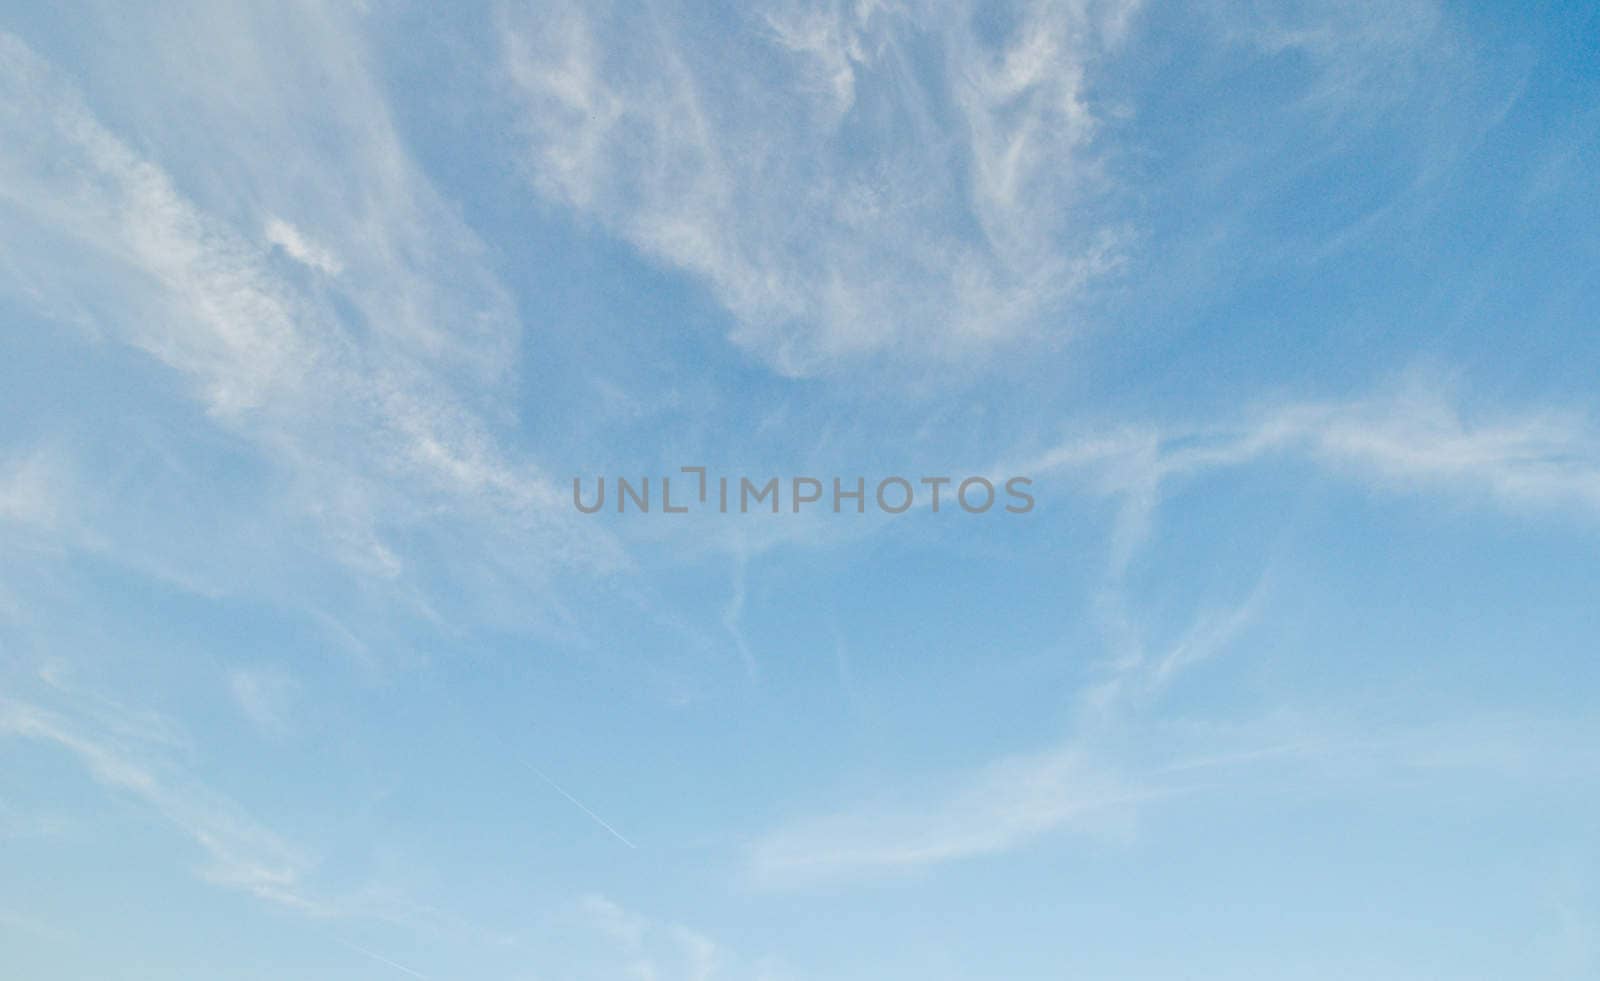 The blue sky with white plumose clouds